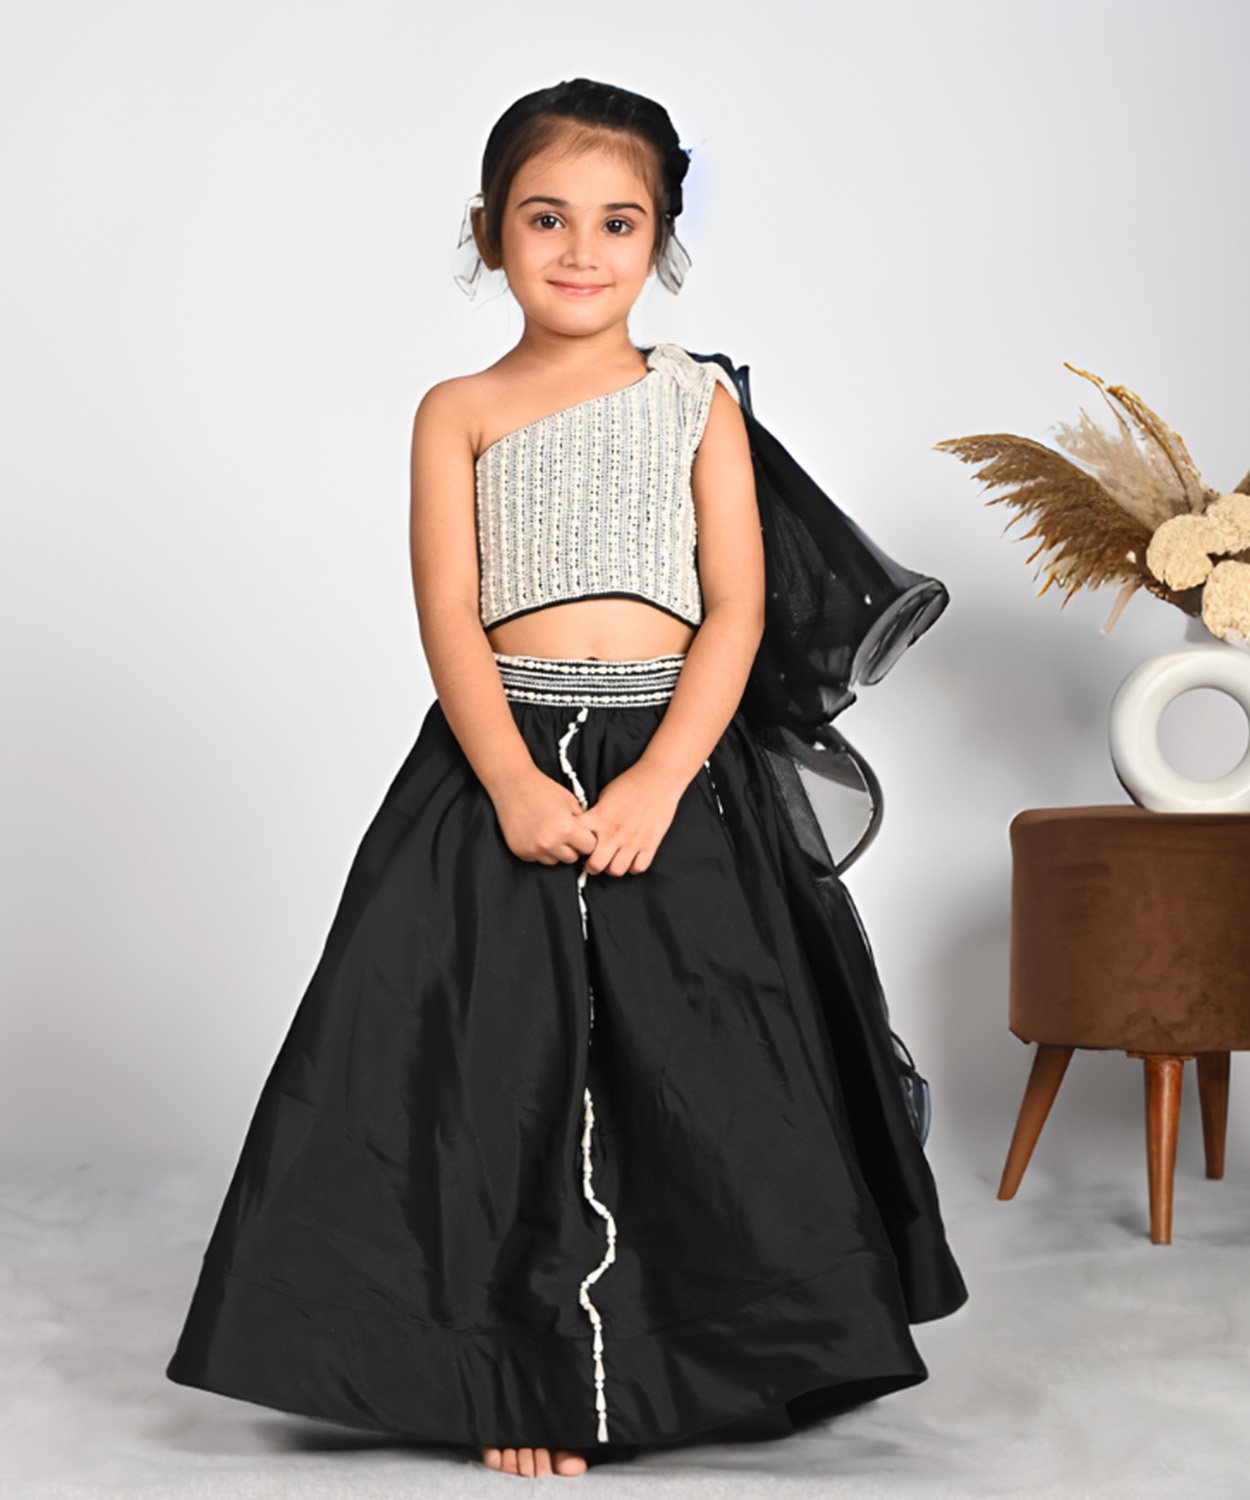 Sparkling Silver Top With A Black, Voluminous Skirt Featuring White Accents